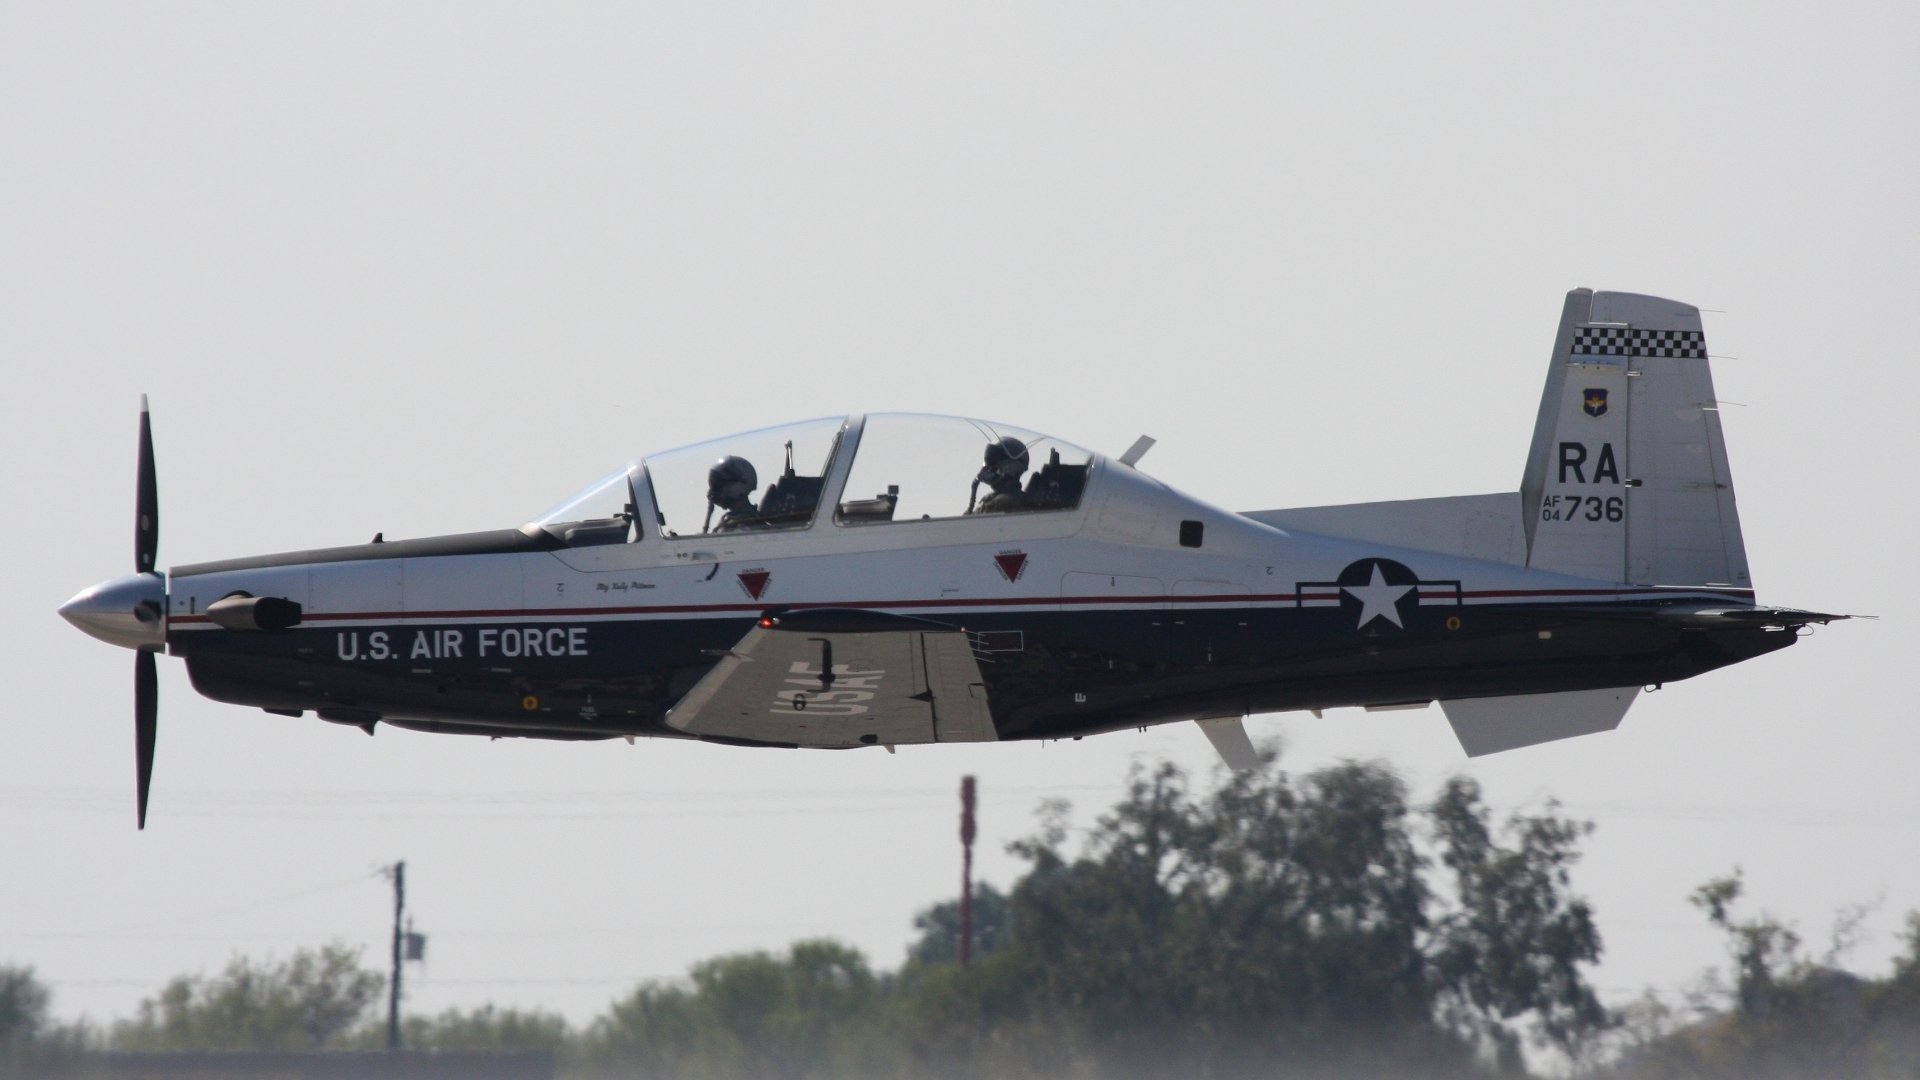 Beechcraft T-6 Texan Ii Backgrounds, Compatible - PC, Mobile, Gadgets| 1920x1080 px